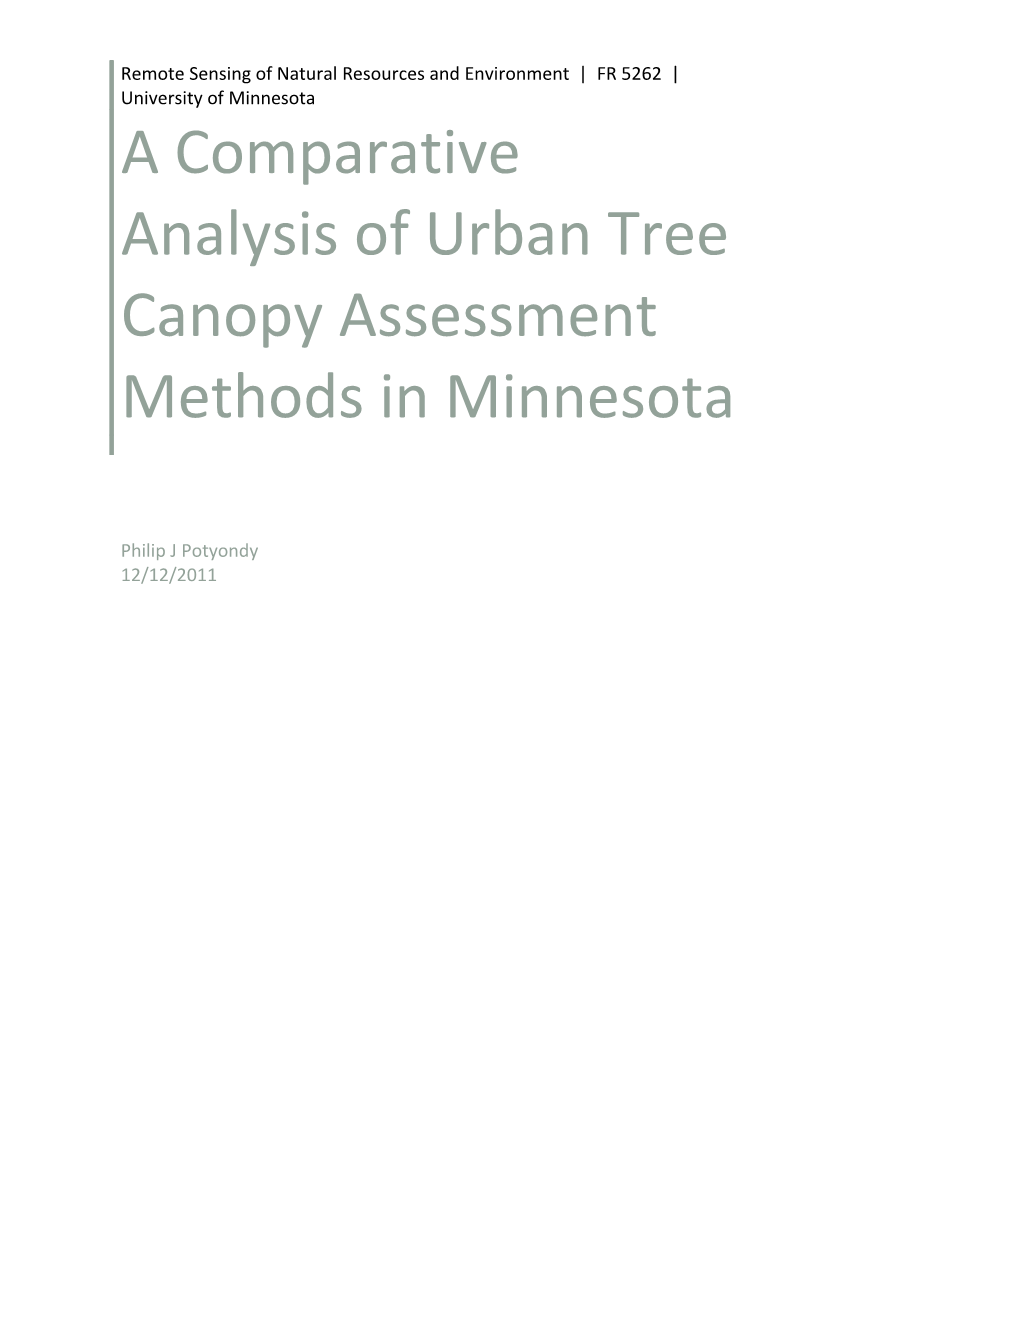 A Comparative Analysis of Urban Tree Canopy Assessment Methods in Minnesota